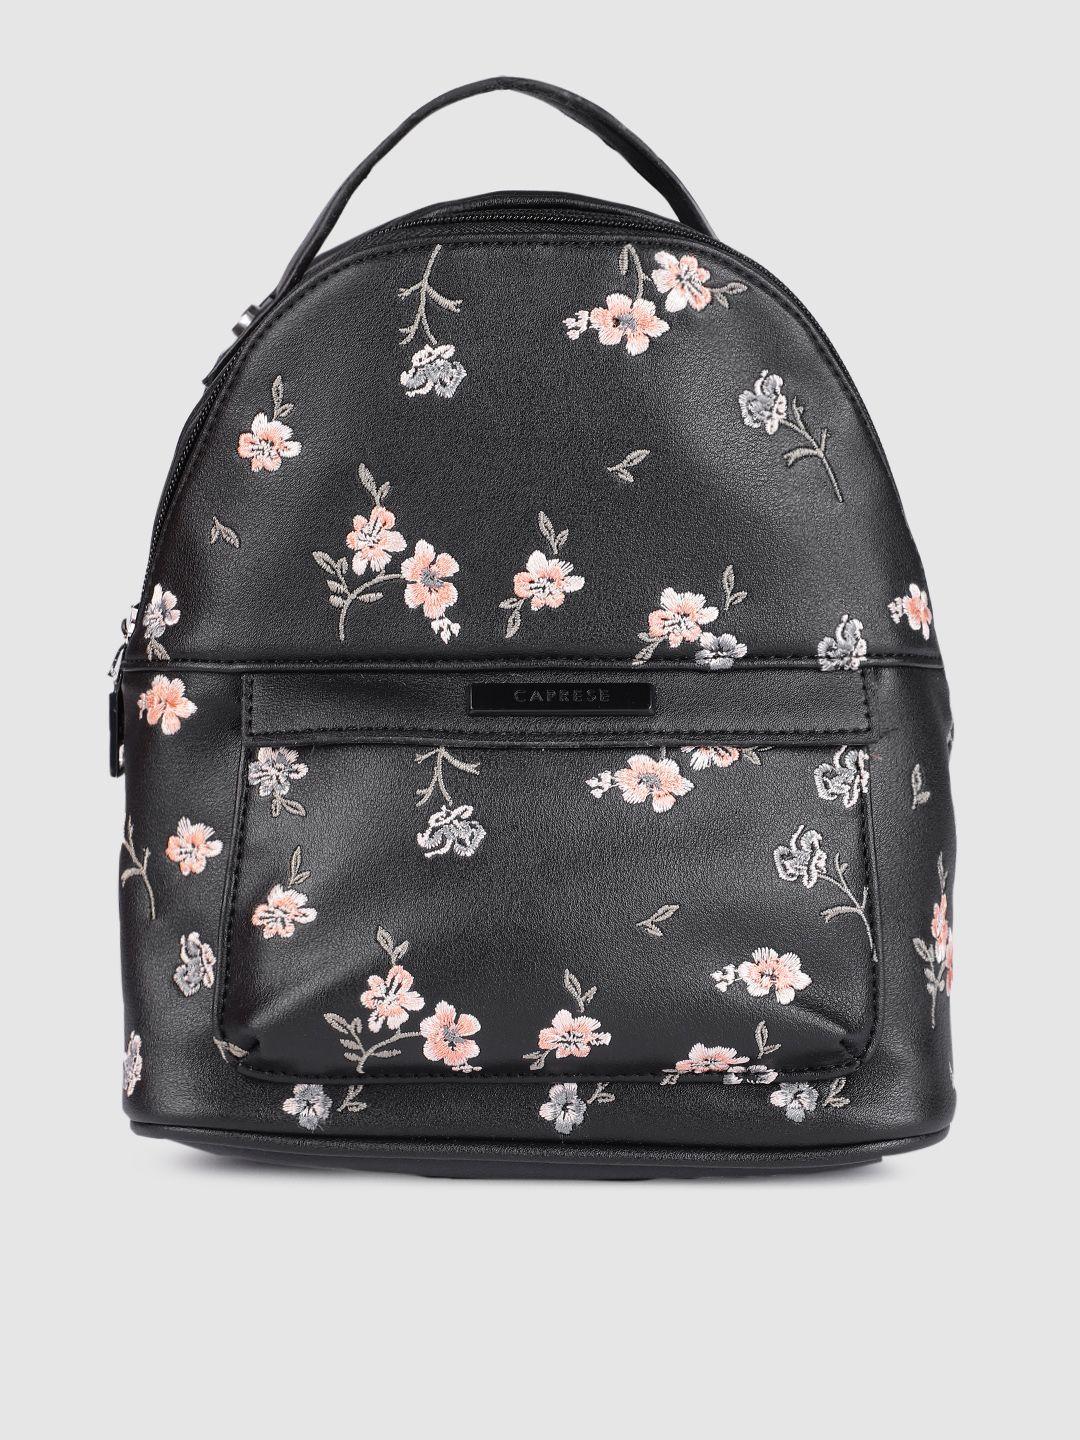 caprese women black floral embroidered bloom leather backpack